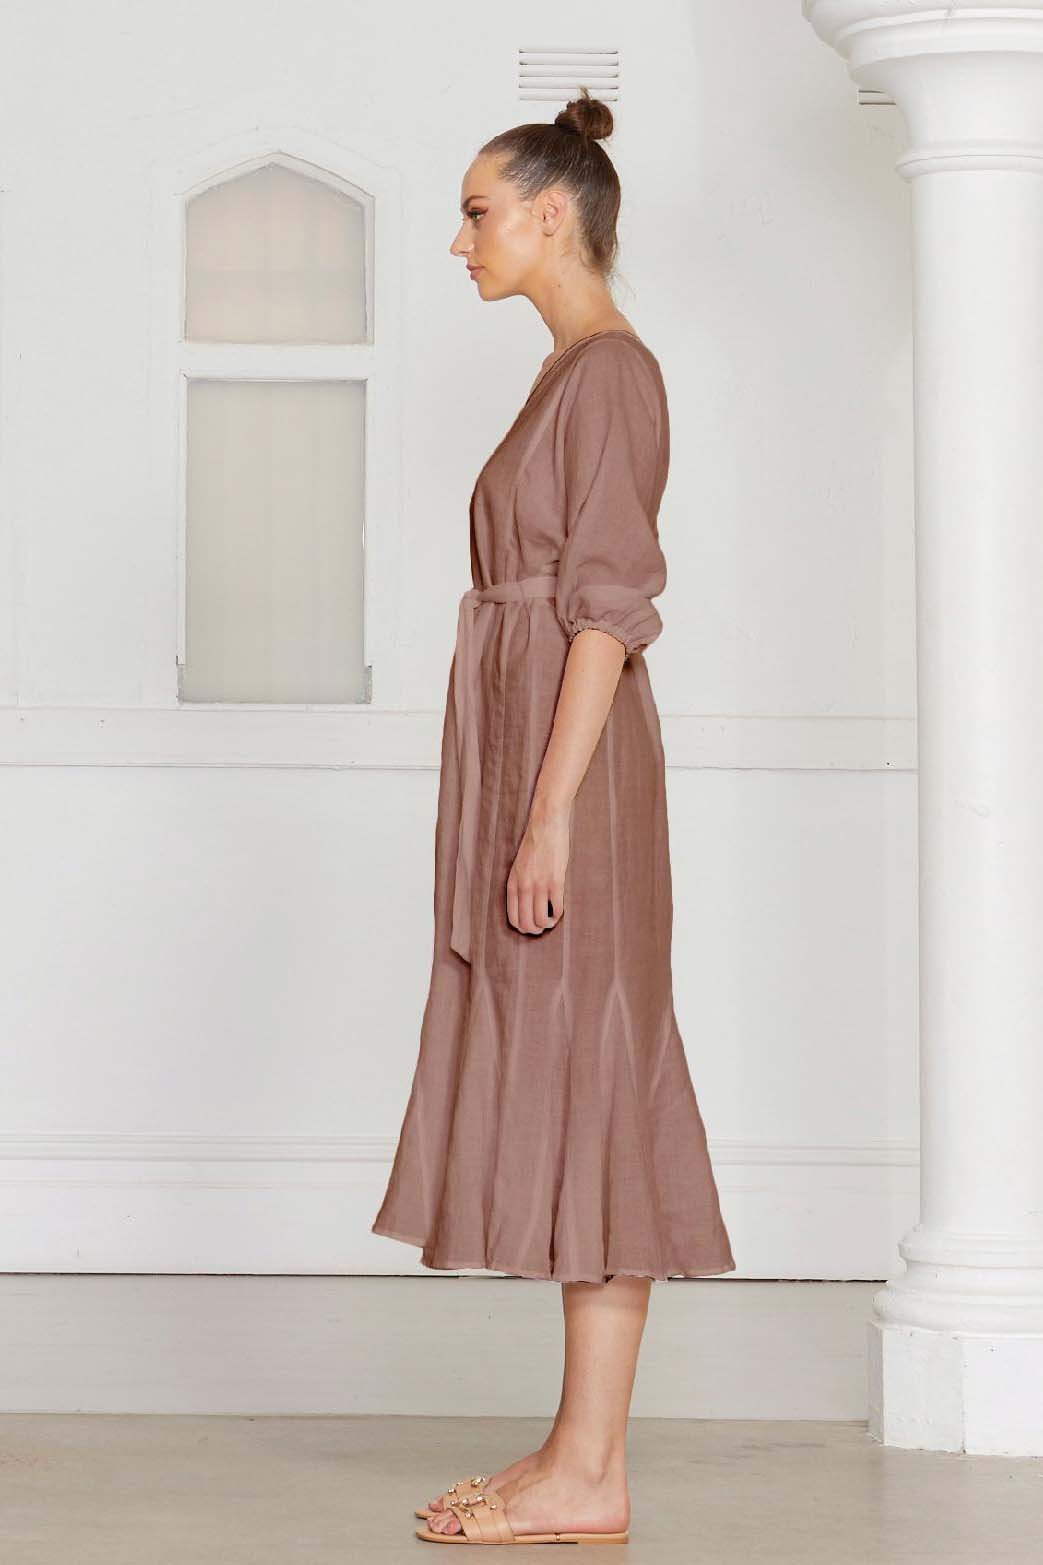 Fate + Becker Love is Dress in Smoked Pearl - Hey Sara